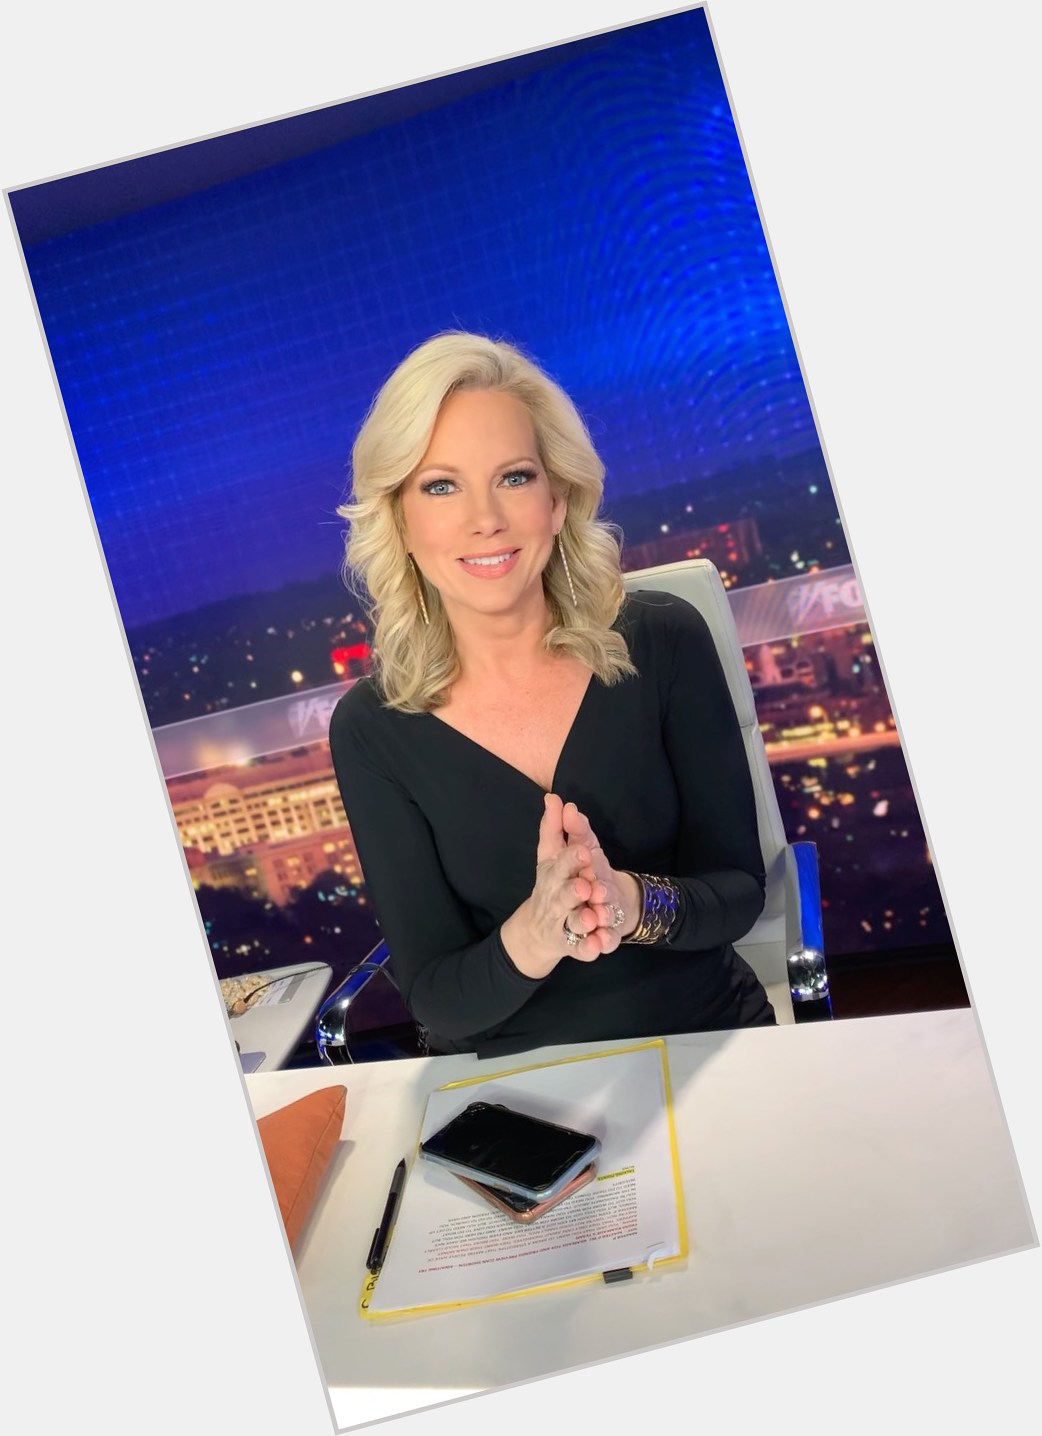 Https://fanpagepress.net/m/S/Shannon Bream Exclusive Hot Pic 4